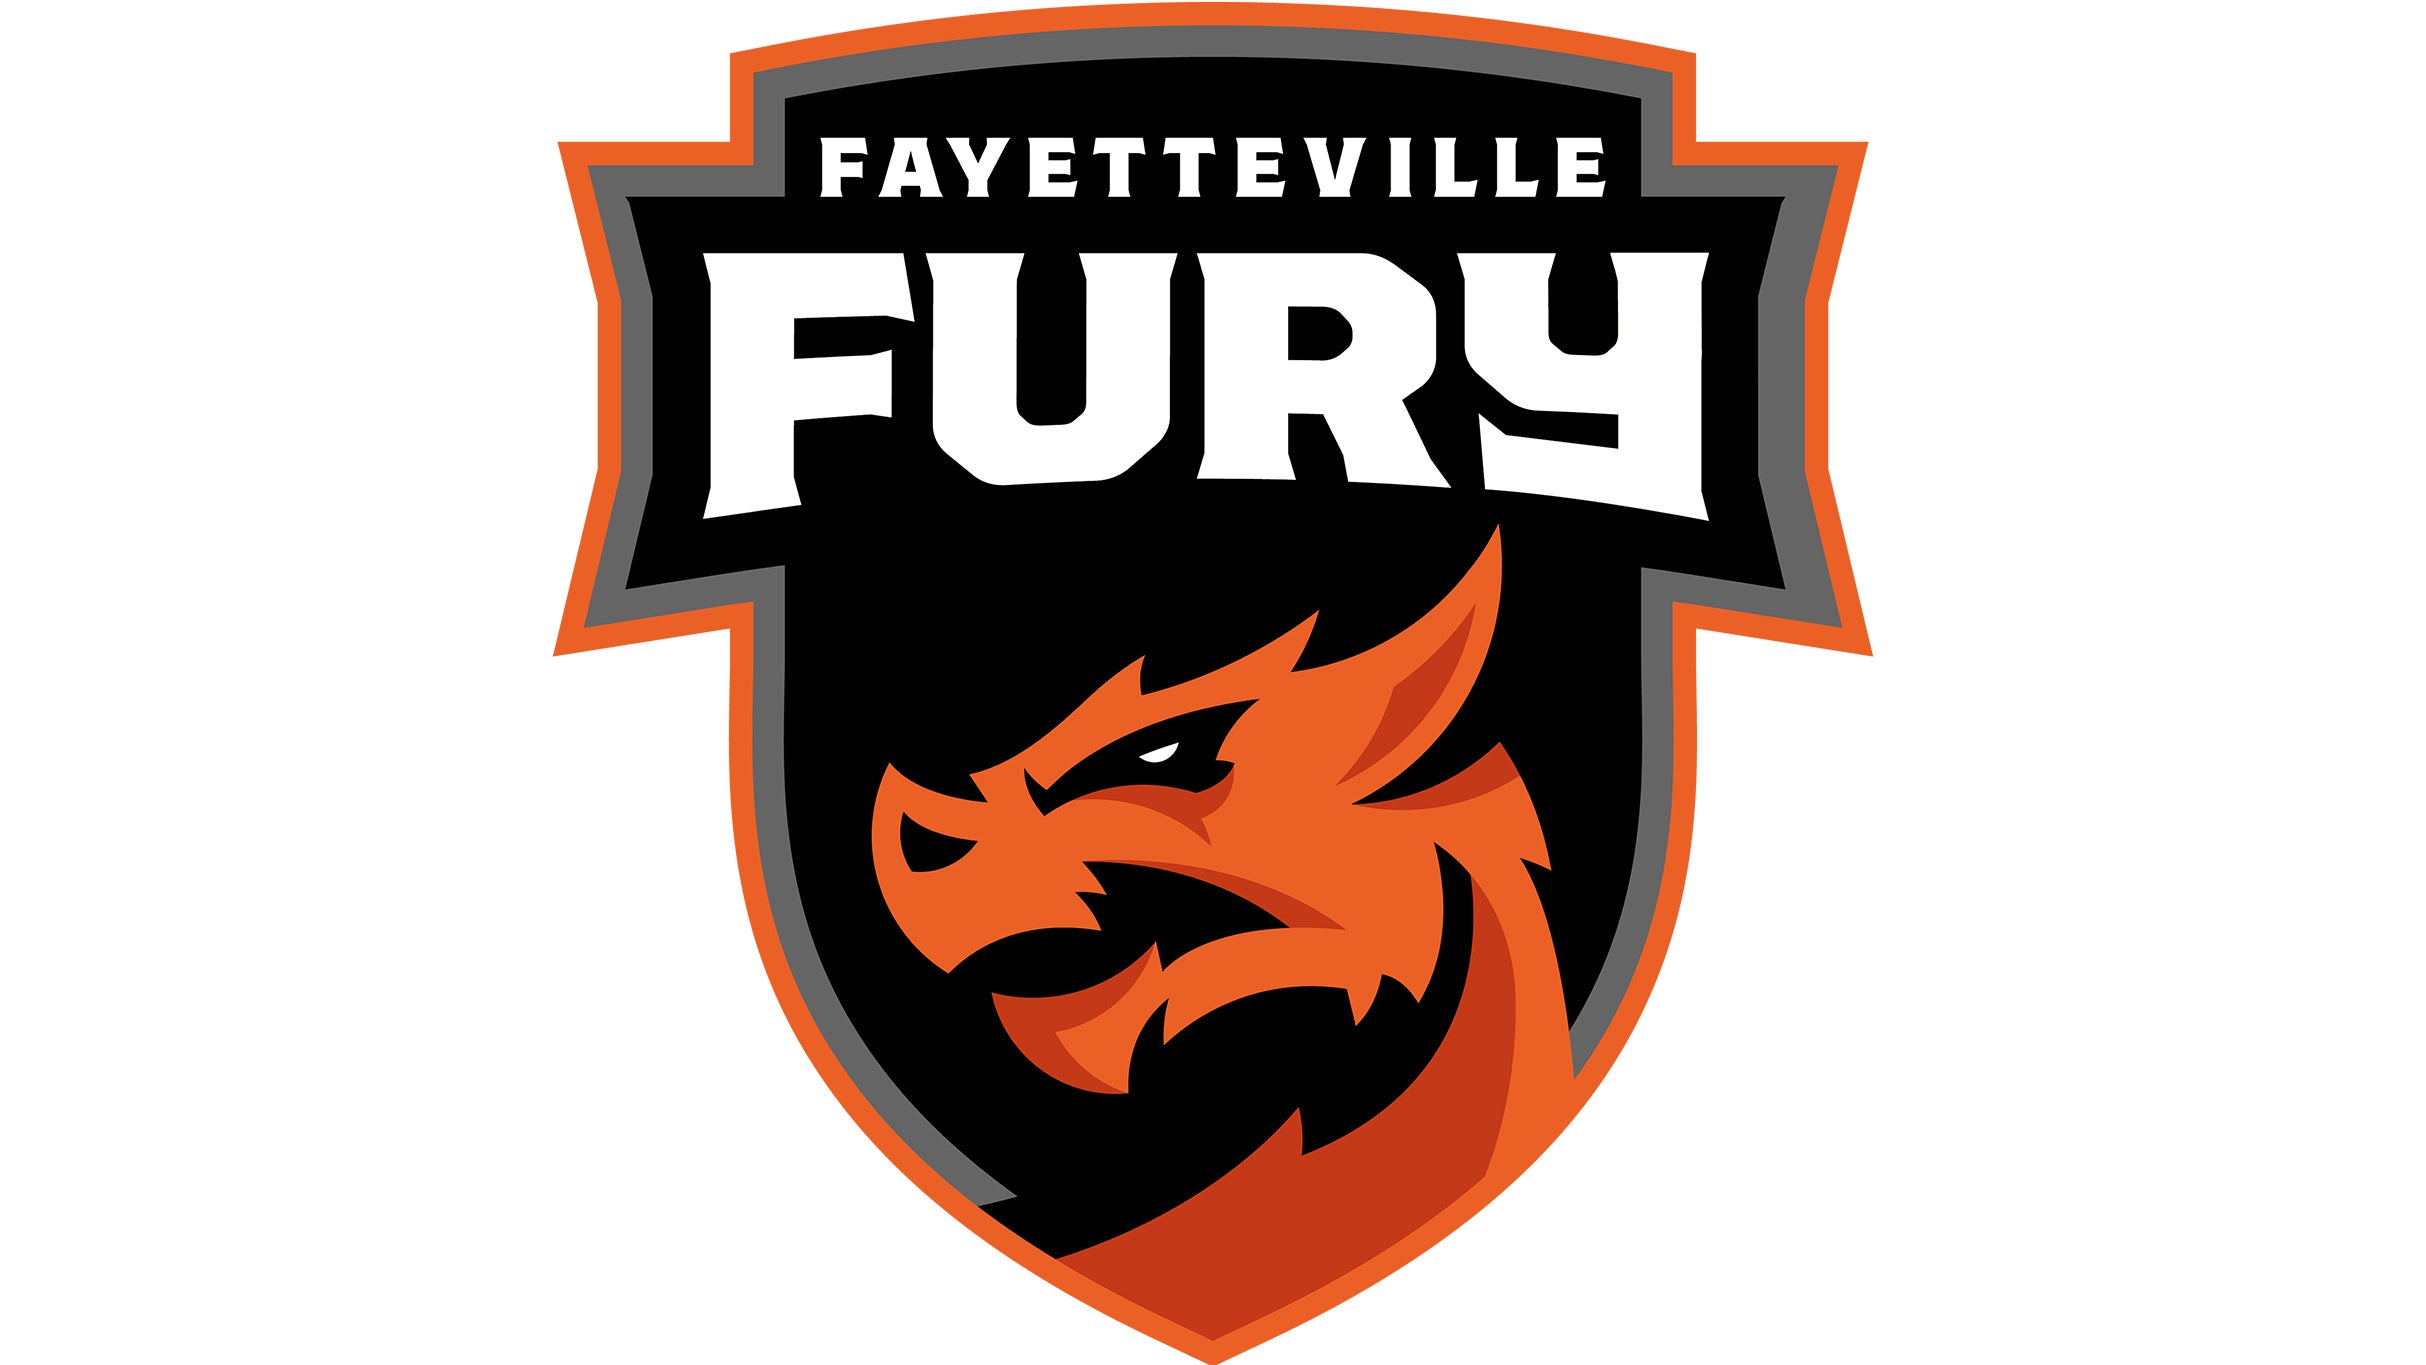 Fayetteville Fury vs. Tampa Bay Strikers at Crown Coliseum